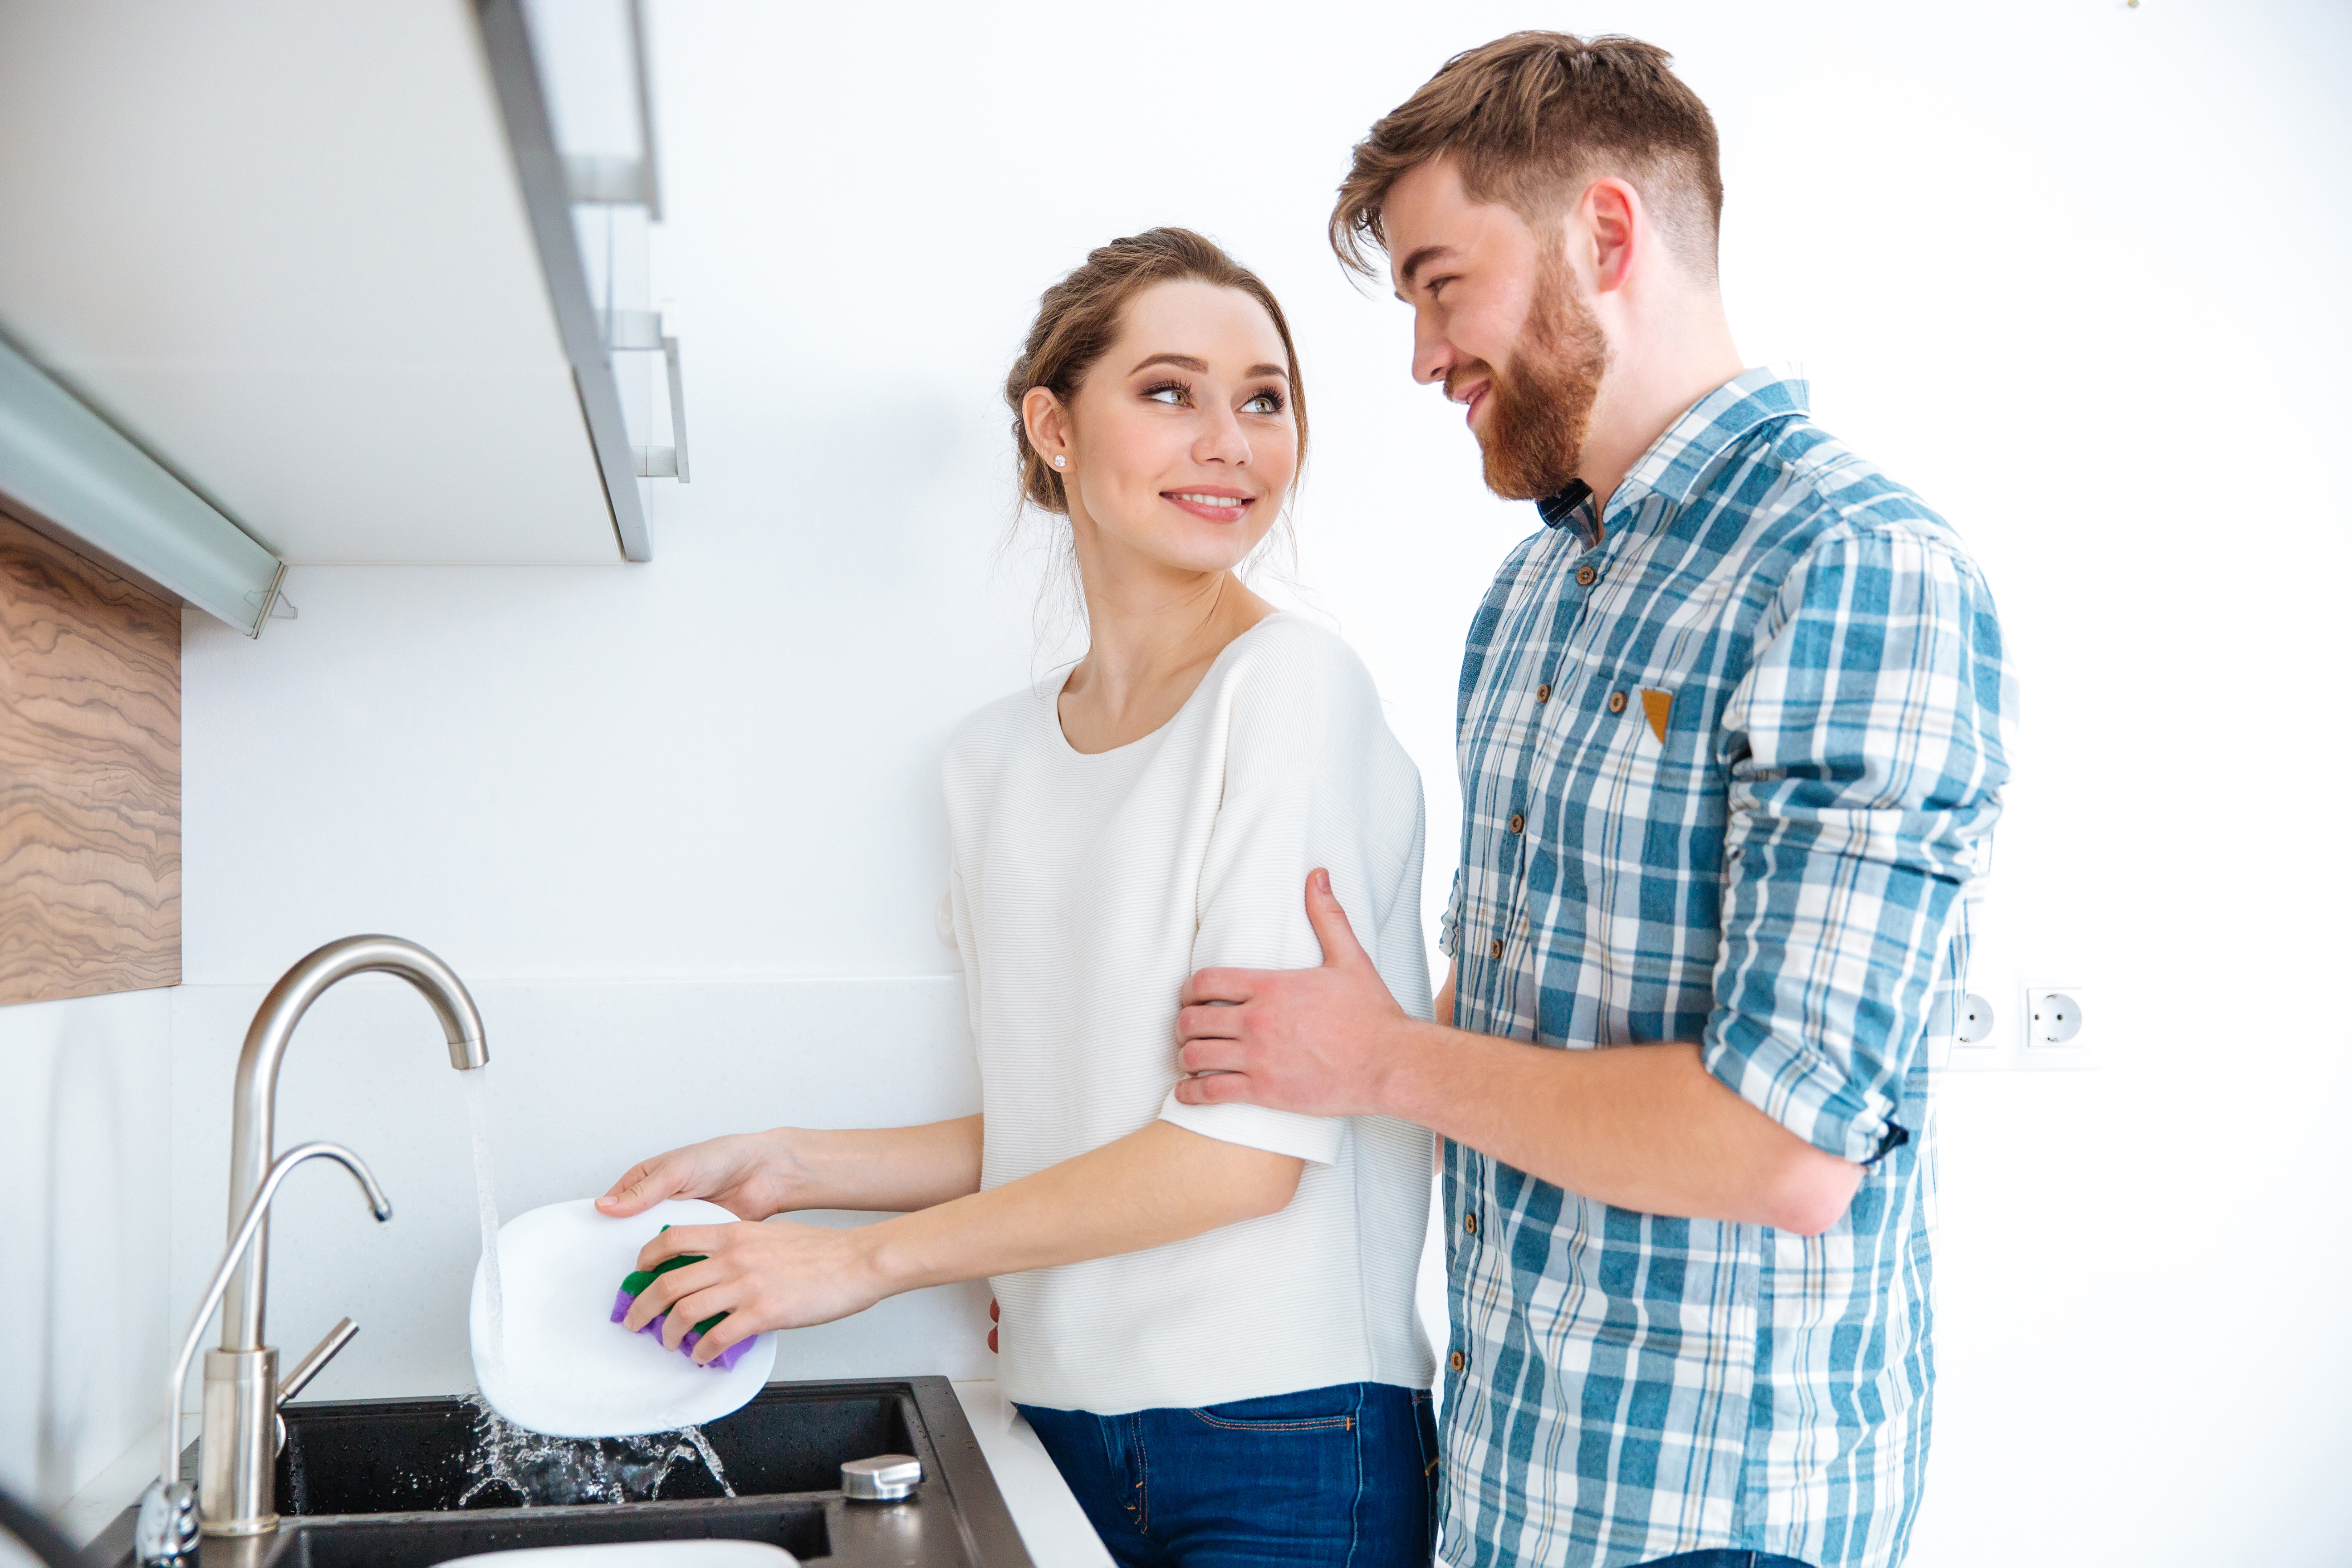 A husband helping his wife in the kitchen | Source: Shutterstock